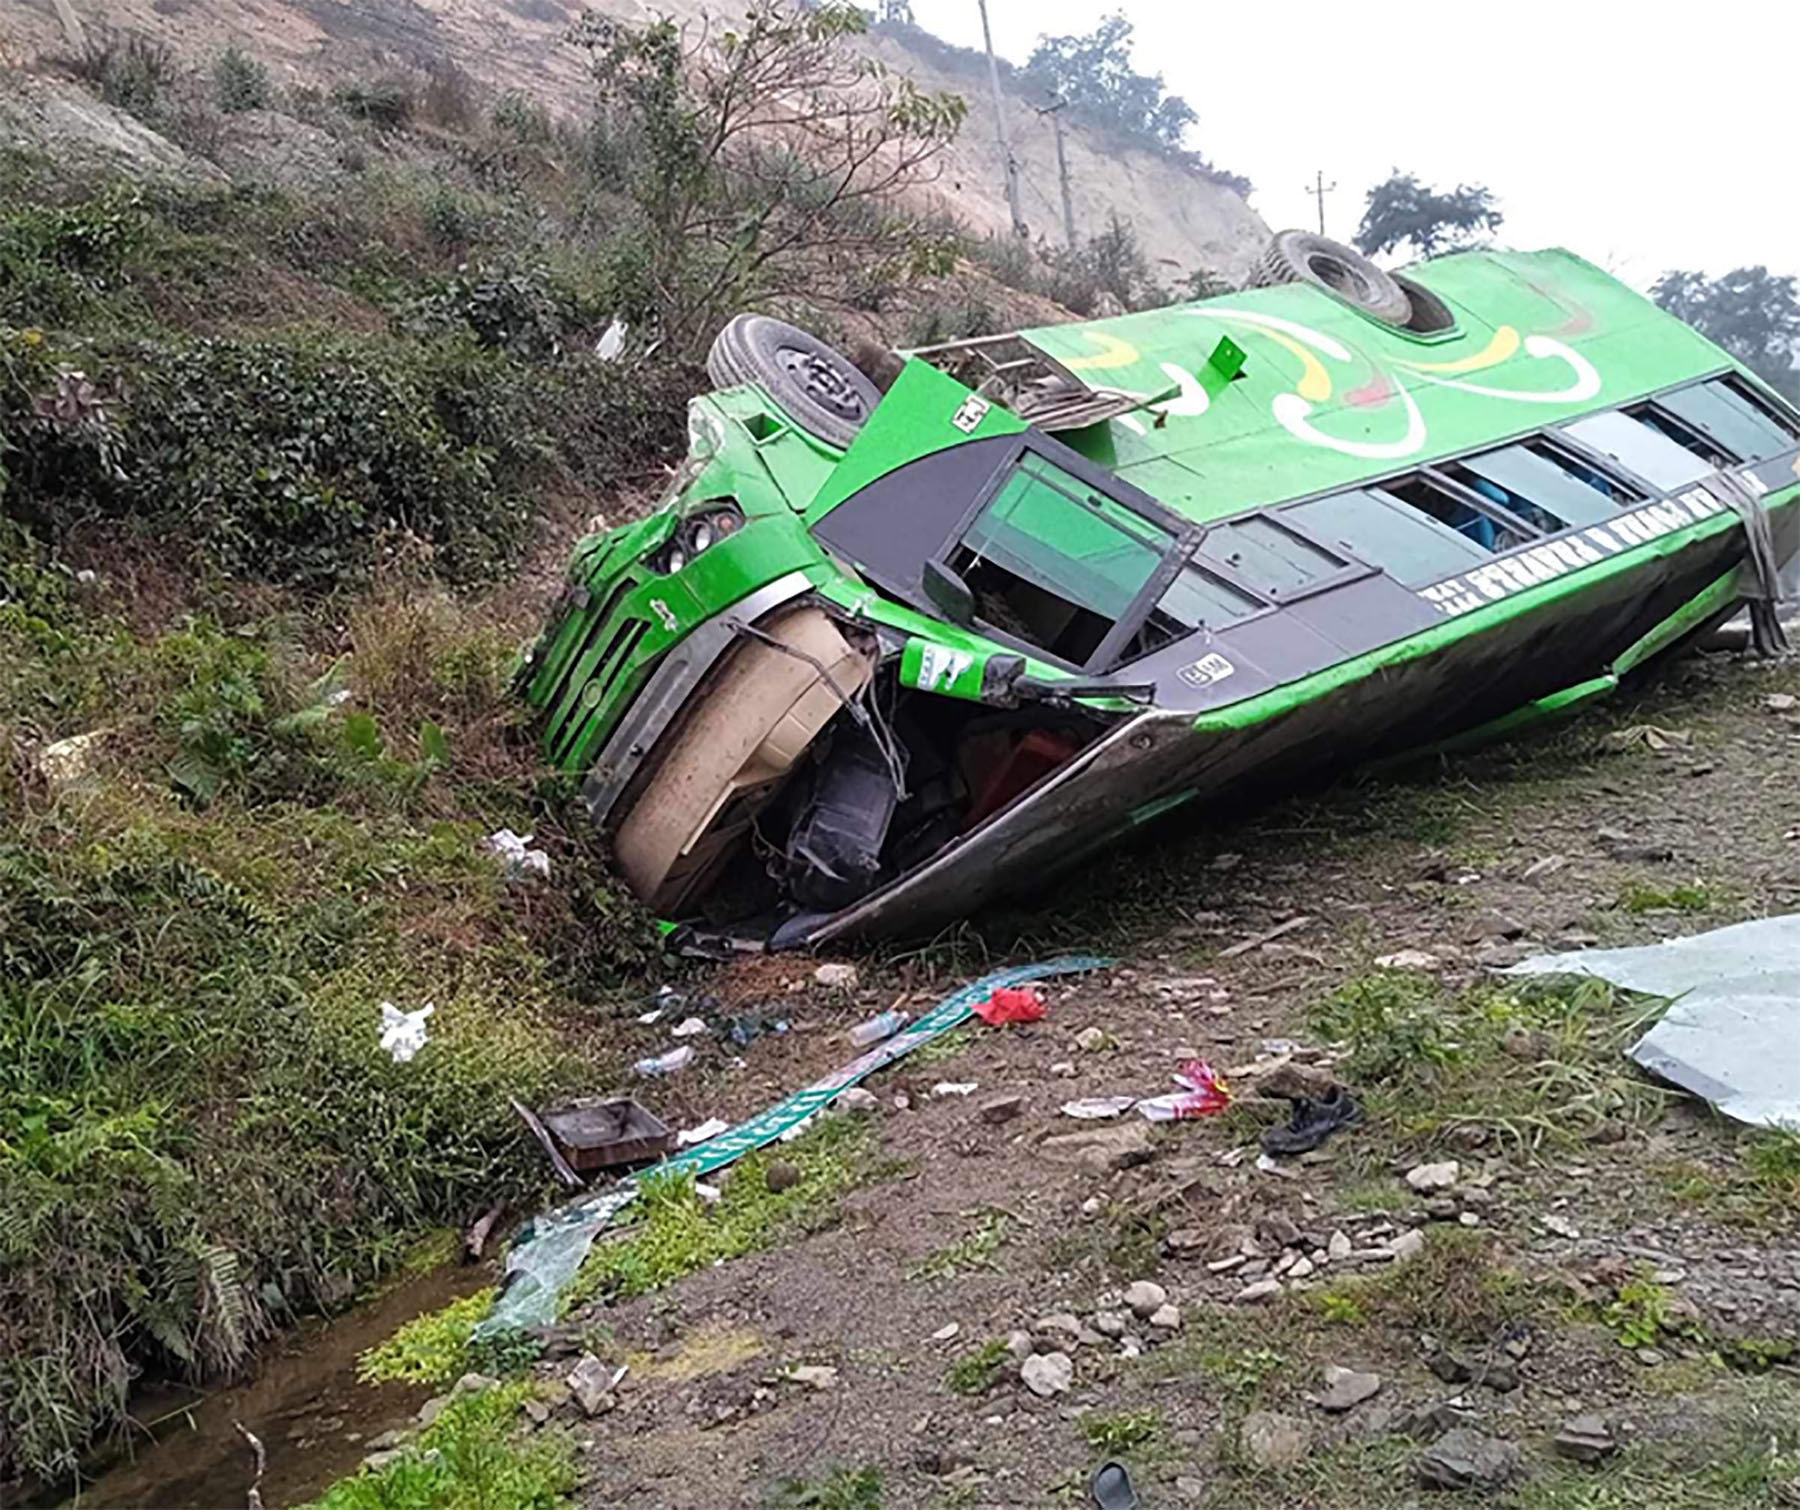 32 injured as bus traveling from Birgunj to Pokhara plunges into river